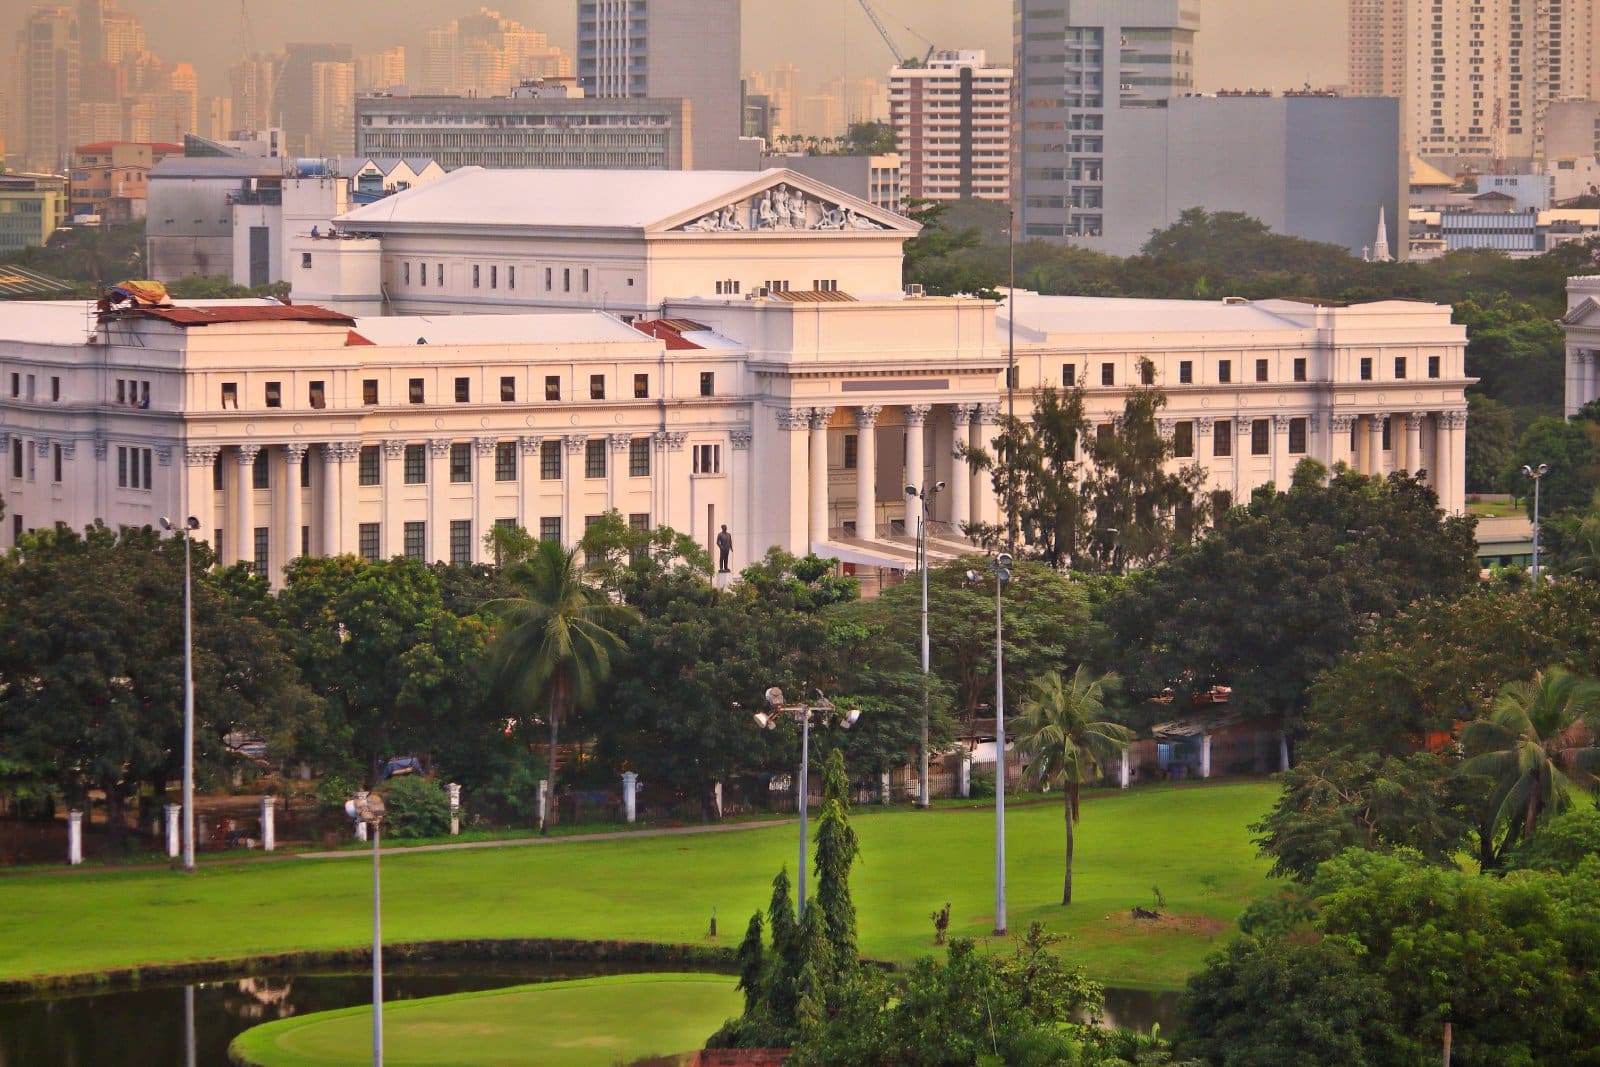 <p class="wp-caption-text">Image Credit: Shutterstock / Tupungato</p>  <p><span>The National Museum of the Philippines, established in 1901, is the primary institution for preserving, documenting, and exhibiting the Philippines’ cultural, historical, and natural heritage. The museum complex comprises several buildings dedicated to disciplines such as fine arts, anthropology, natural history, and planetarium sciences, making it a comprehensive repository of the Filipino legacy.</span></p> <p><span>The National Museum of Fine Arts, formerly the National Art Gallery, houses an extensive collection of Philippine art spanning several centuries, showcasing works from the Spanish colonial period to contemporary times. It is home to notable pieces such as Juan Luna’s “Spoliarium” and Felix Resurreccion Hidalgo’s “El Asesinato del Gobernador Bustamante,” among others, which play a crucial role in the nation’s artistic narrative.</span></p> <p><span>Adjacent to the Fine Arts building, the National Museum of Anthropology (formerly the Museum of the Filipino People) features an array of ethnographic and archaeological exhibits that explore the Filipino people’s diverse cultures, traditions, and practices from prehistoric times.</span></p> <p><span>The National Museum of Natural History, the newest addition to the complex, offers insights into the Philippines’ unique biodiversity and ecological systems. It displays a wide range of specimens, including flora, fauna, and geological formations, highlighting the country’s rich natural environment and the importance of its conservation.</span></p> <p><span>The Planetarium, another integral part of the National Museum, provides educational programs and shows that promote astronomy and space science, further enriching the museum’s multidisciplinary approach to learning and discovery.</span></p> <p><b>My Insider’s Tip: </b><span>Admission to the National Museum of the Philippines is free, making it an accessible option for travelers keen on exploring the country’s heritage without spending extra.</span></p>